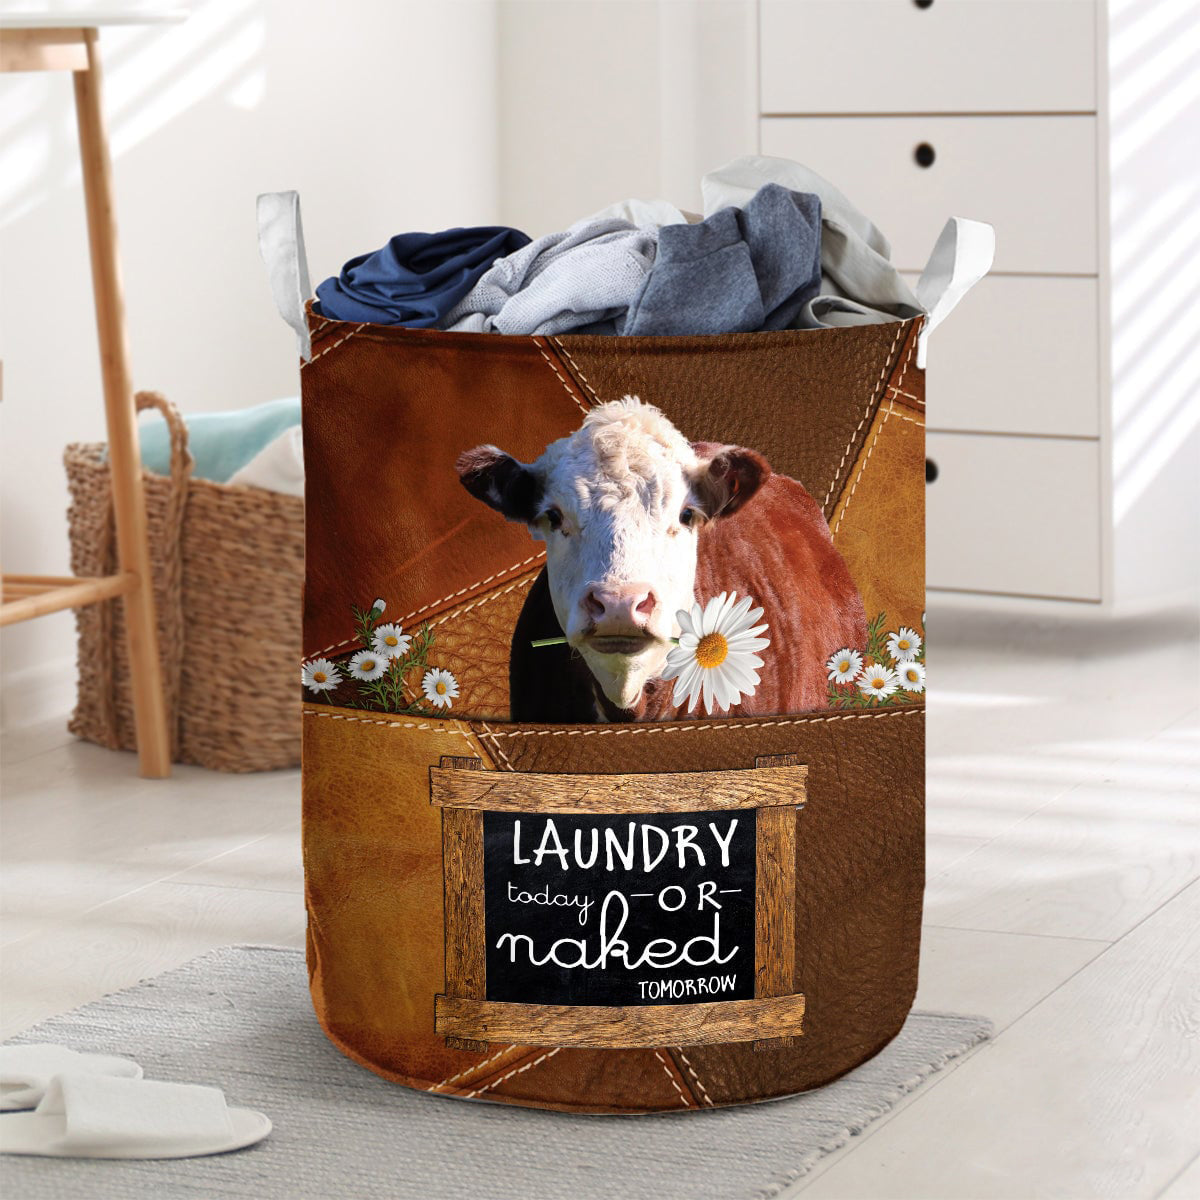 Hereford-laundry today or naked tomorrow laundry basket